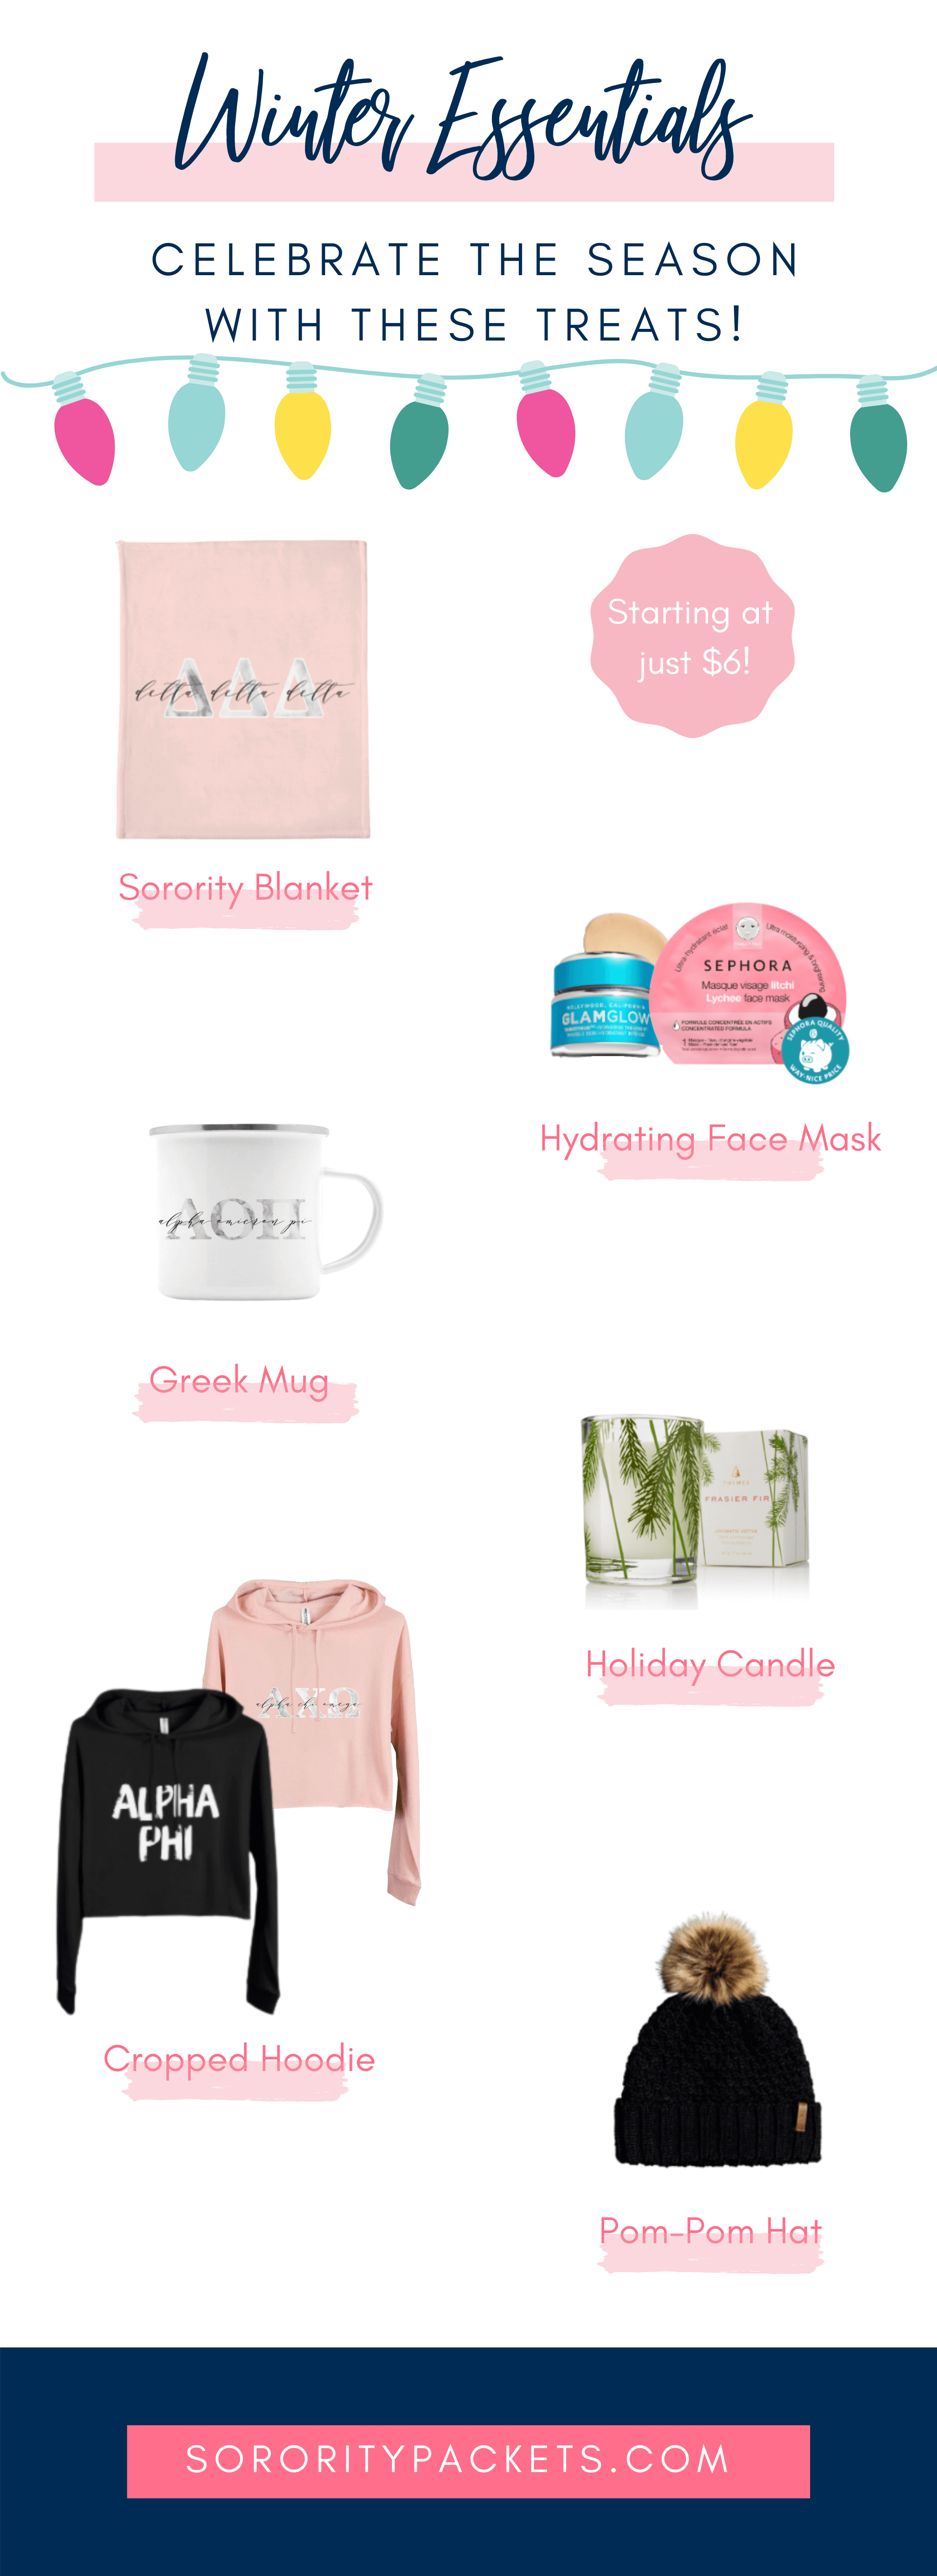 Pin Me graphic with winter essentials for sorority sisters